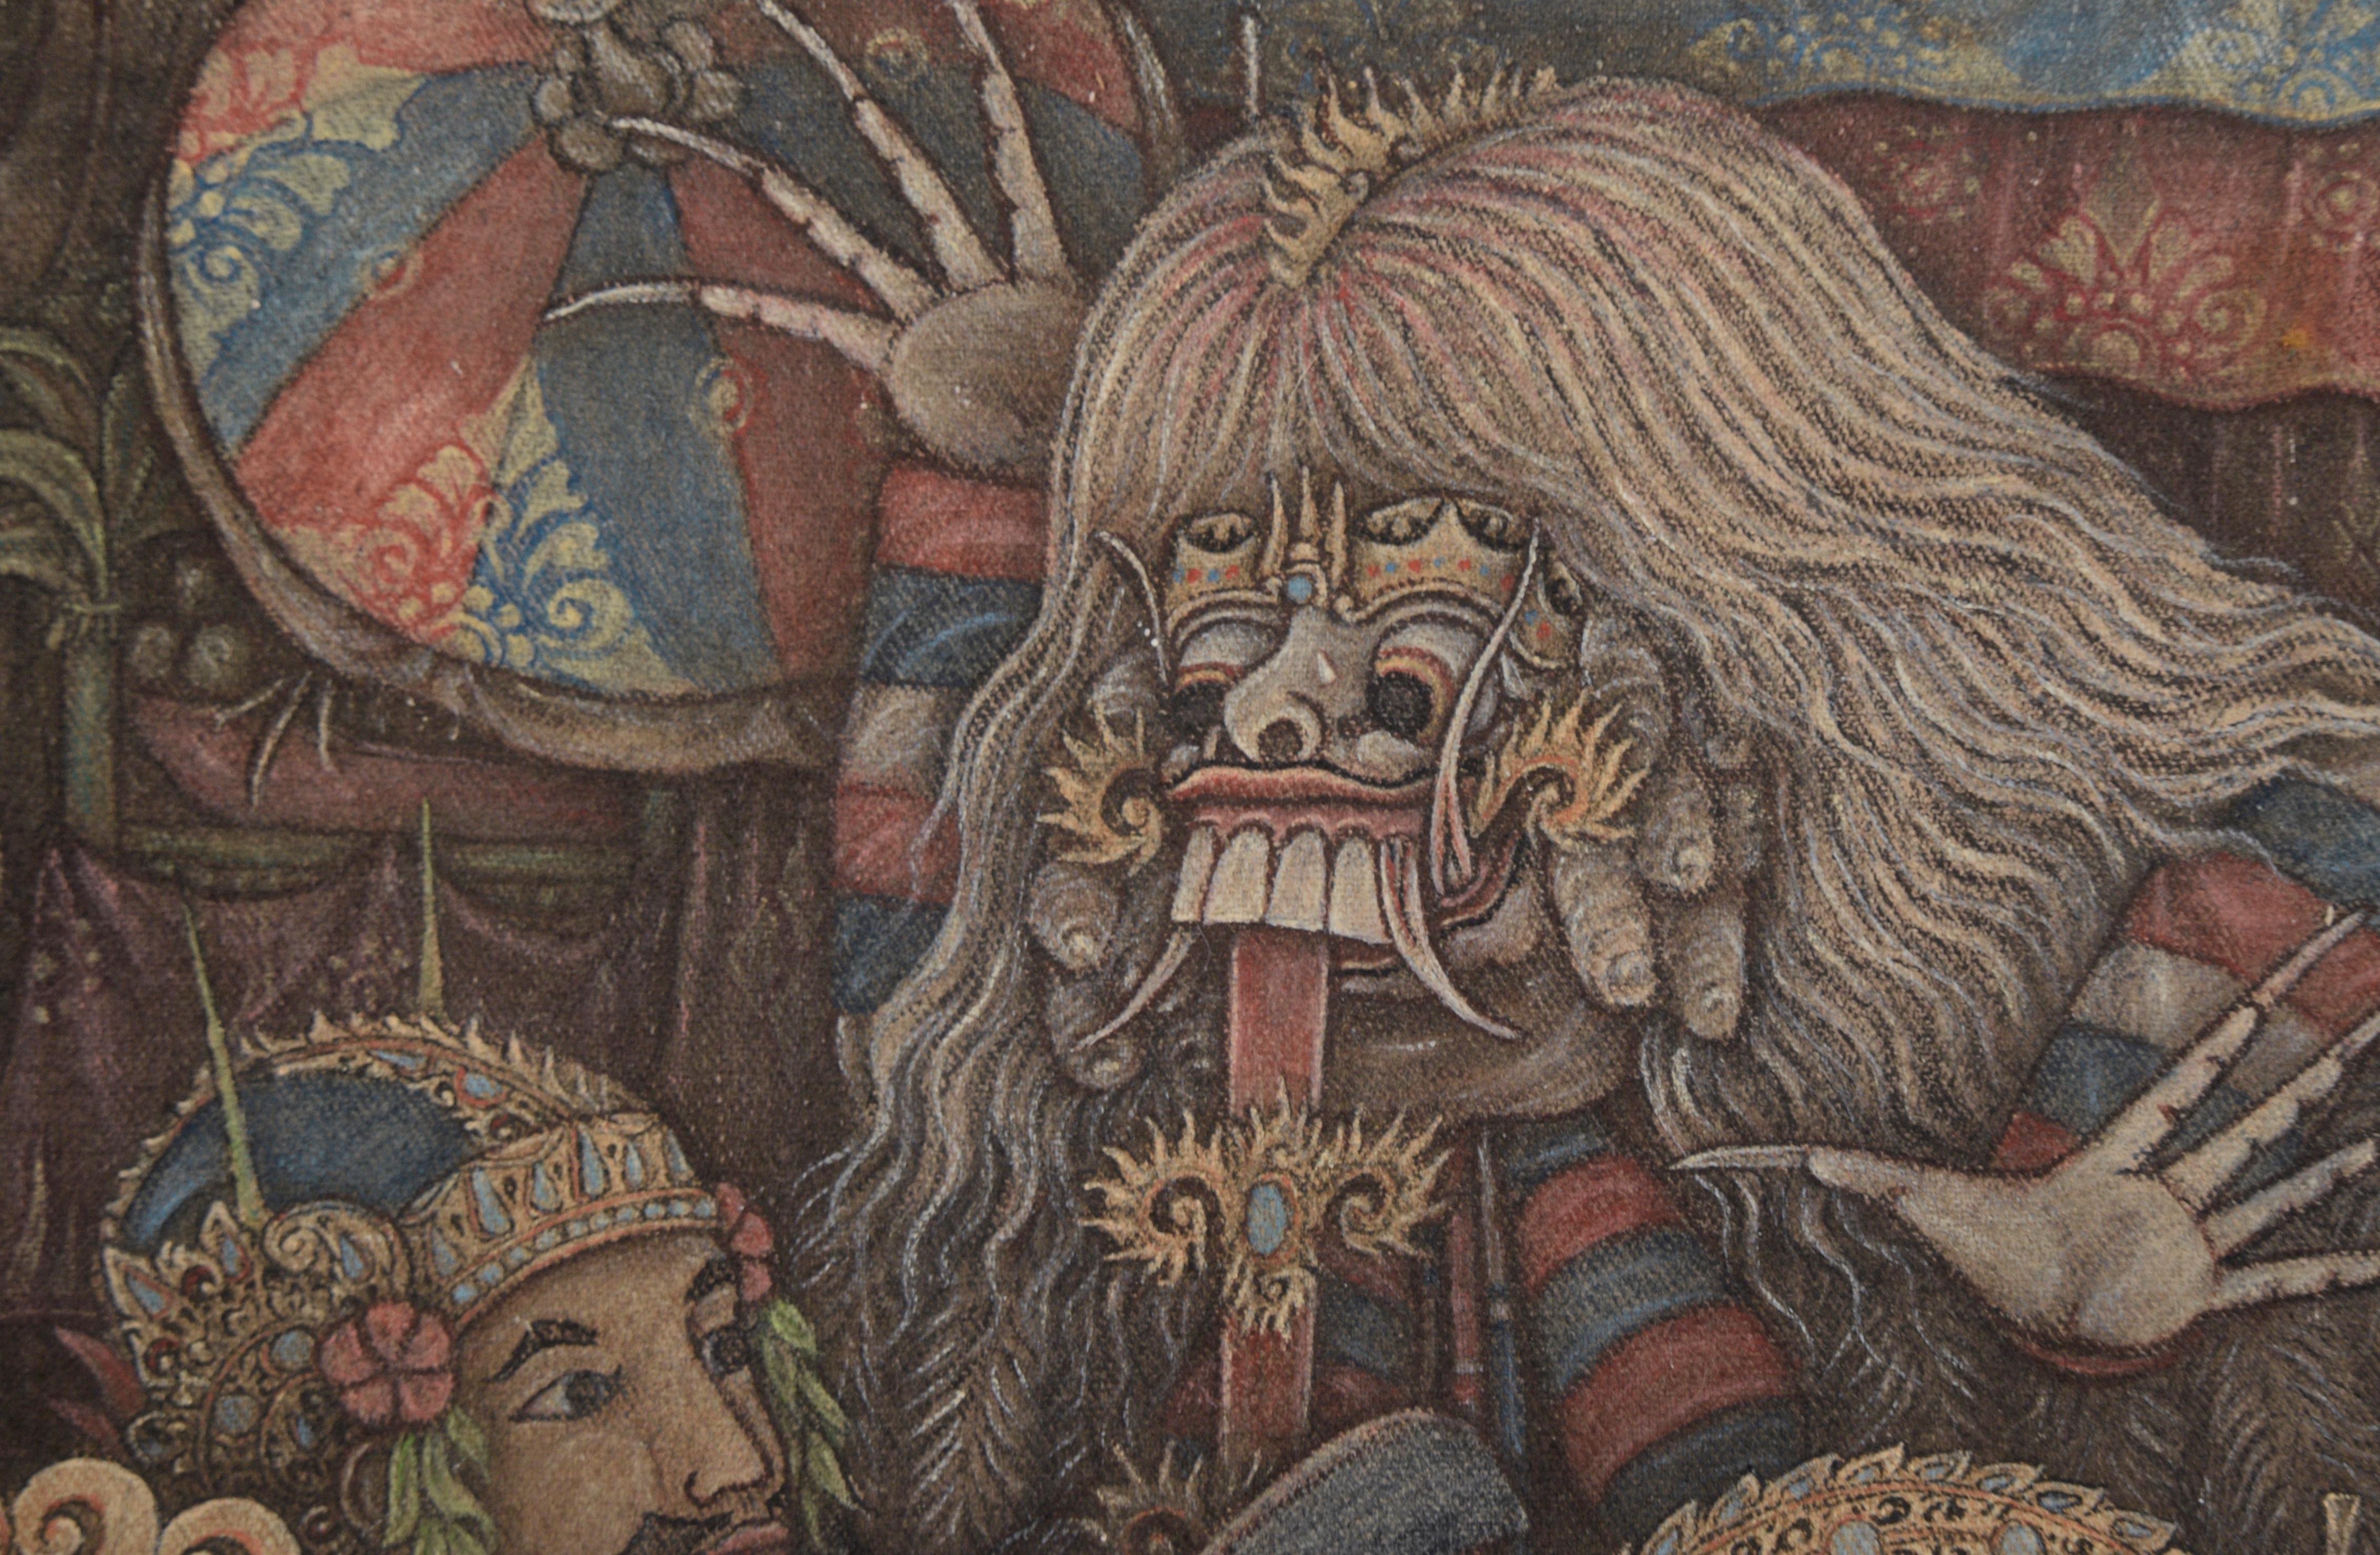 Highly detailed depiction of a Barong Mask dance in Bali. Several people wearing elaborate masks are taking part in a dance or ritual. People are dressed in white, red, and blue striped clothing in addition to the masks and costumes. Of particular